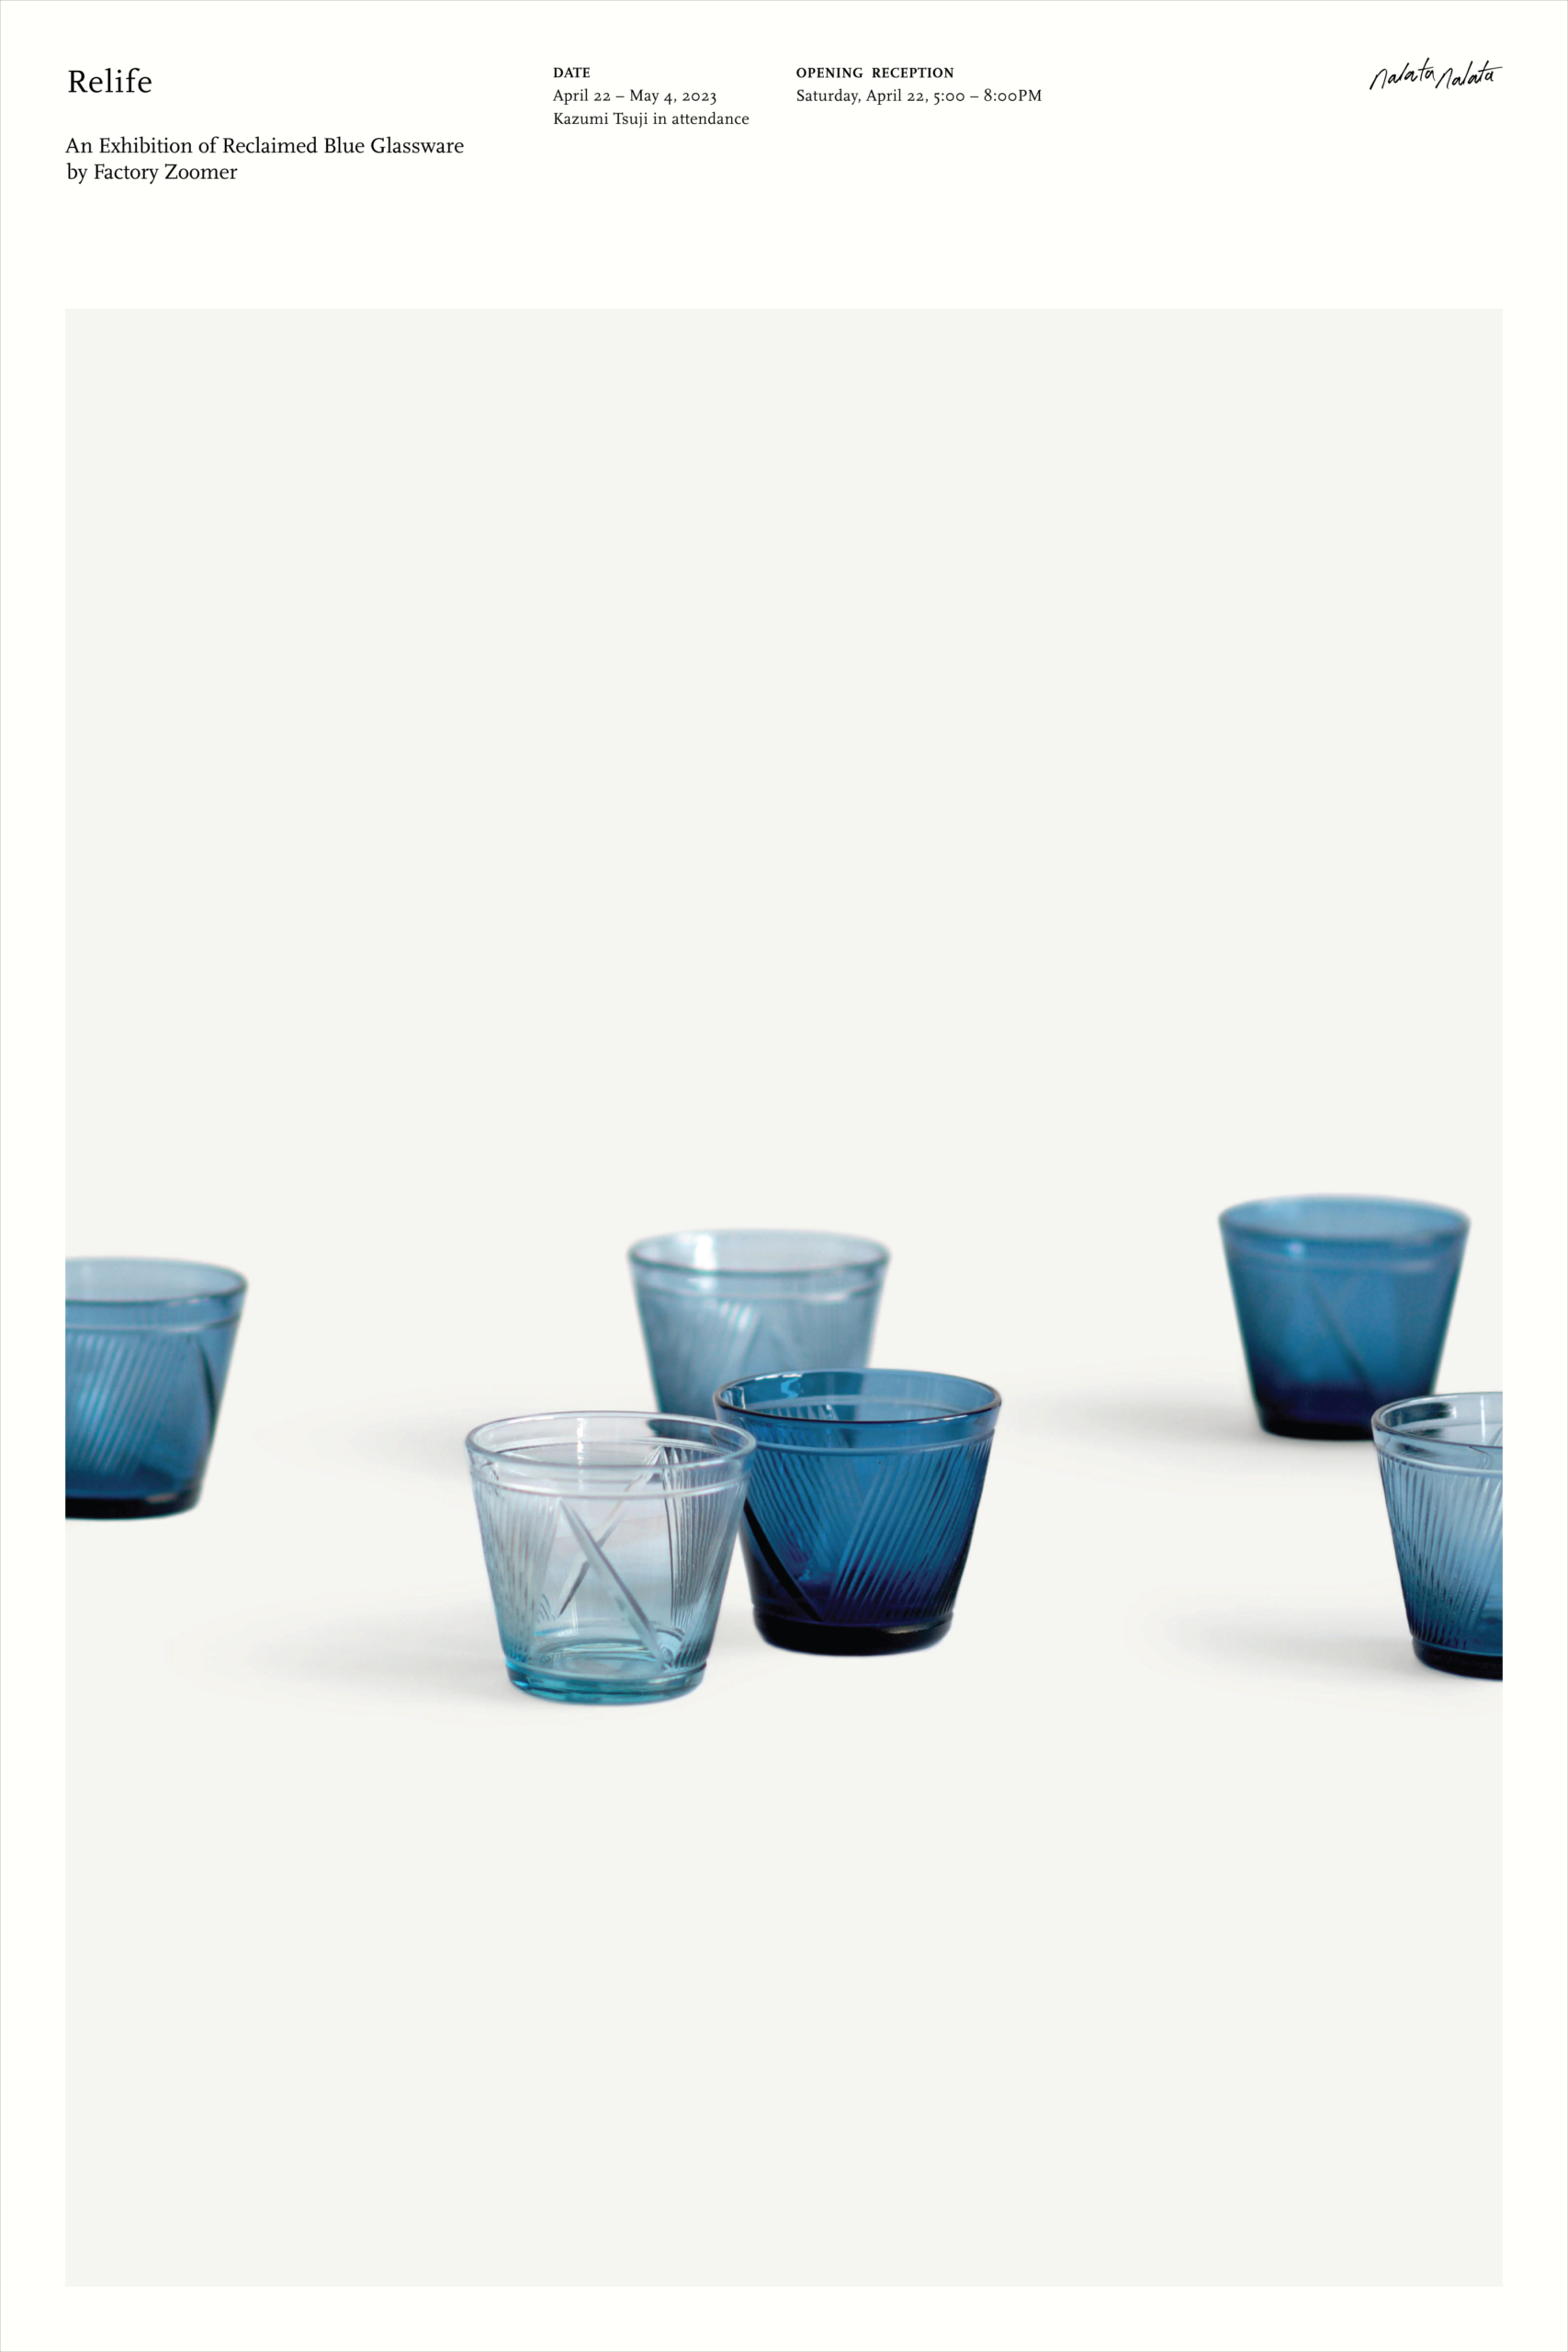 poster for factory zoomer Relife exhibition with blue whiskey glasses